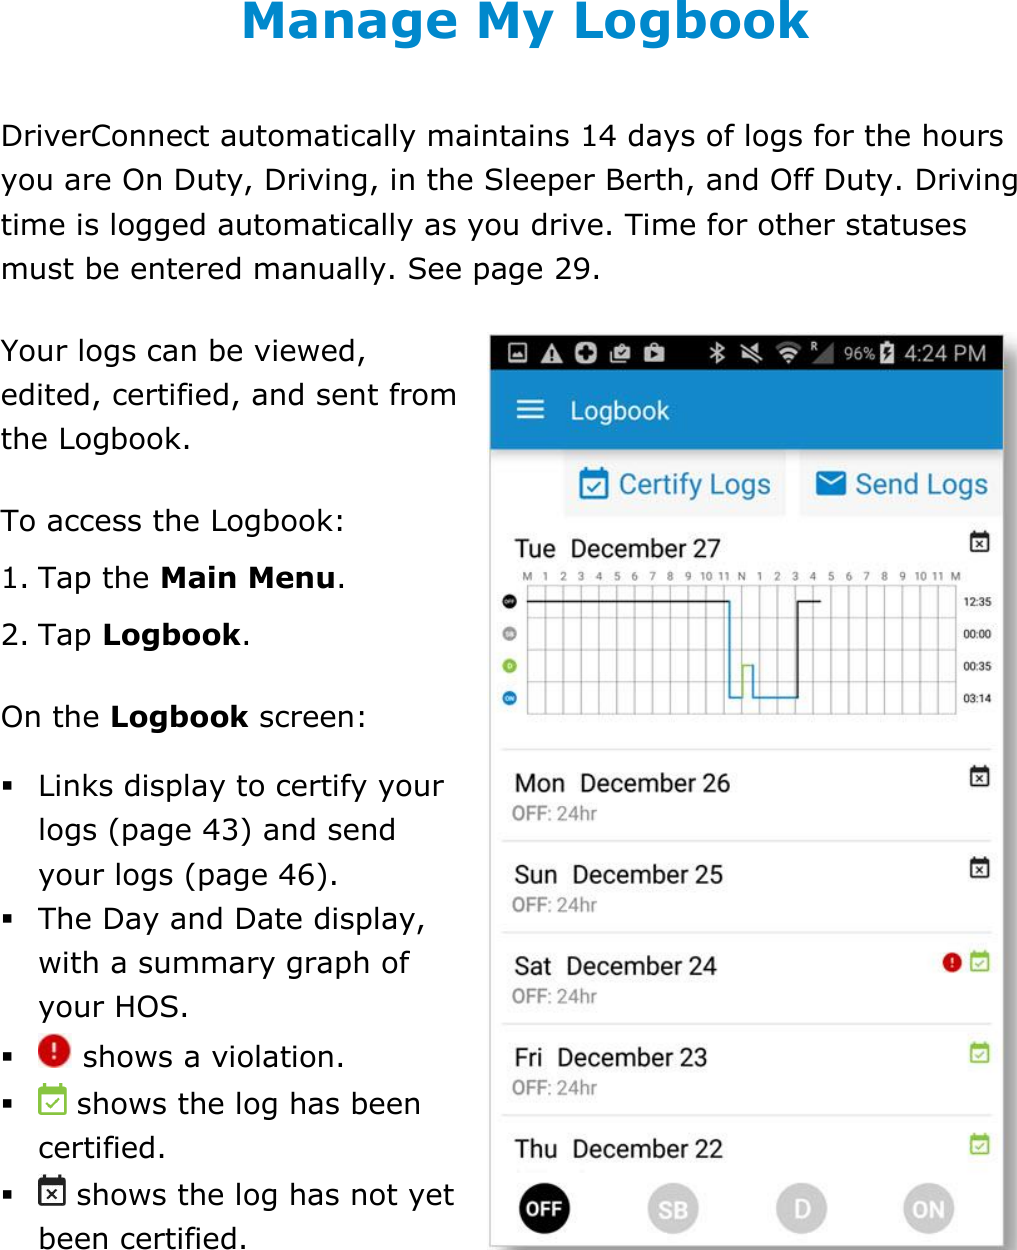 Manage My Logbook DriverConnect User Guide  39 © 2017, Rand McNally, Inc. Manage My Logbook DriverConnect automatically maintains 14 days of logs for the hours you are On Duty, Driving, in the Sleeper Berth, and Off Duty. Driving time is logged automatically as you drive. Time for other statuses must be entered manually. See page 29.  Your logs can be viewed, edited, certified, and sent from the Logbook. To access the Logbook: 1. Tap the Main Menu. 2. Tap Logbook.  On the Logbook screen:  Links display to certify your logs (page 43) and send your logs (page 46).  The Day and Date display, with a summary graph of your HOS.   shows a violation.   shows the log has been certified.   shows the log has not yet been certified.   